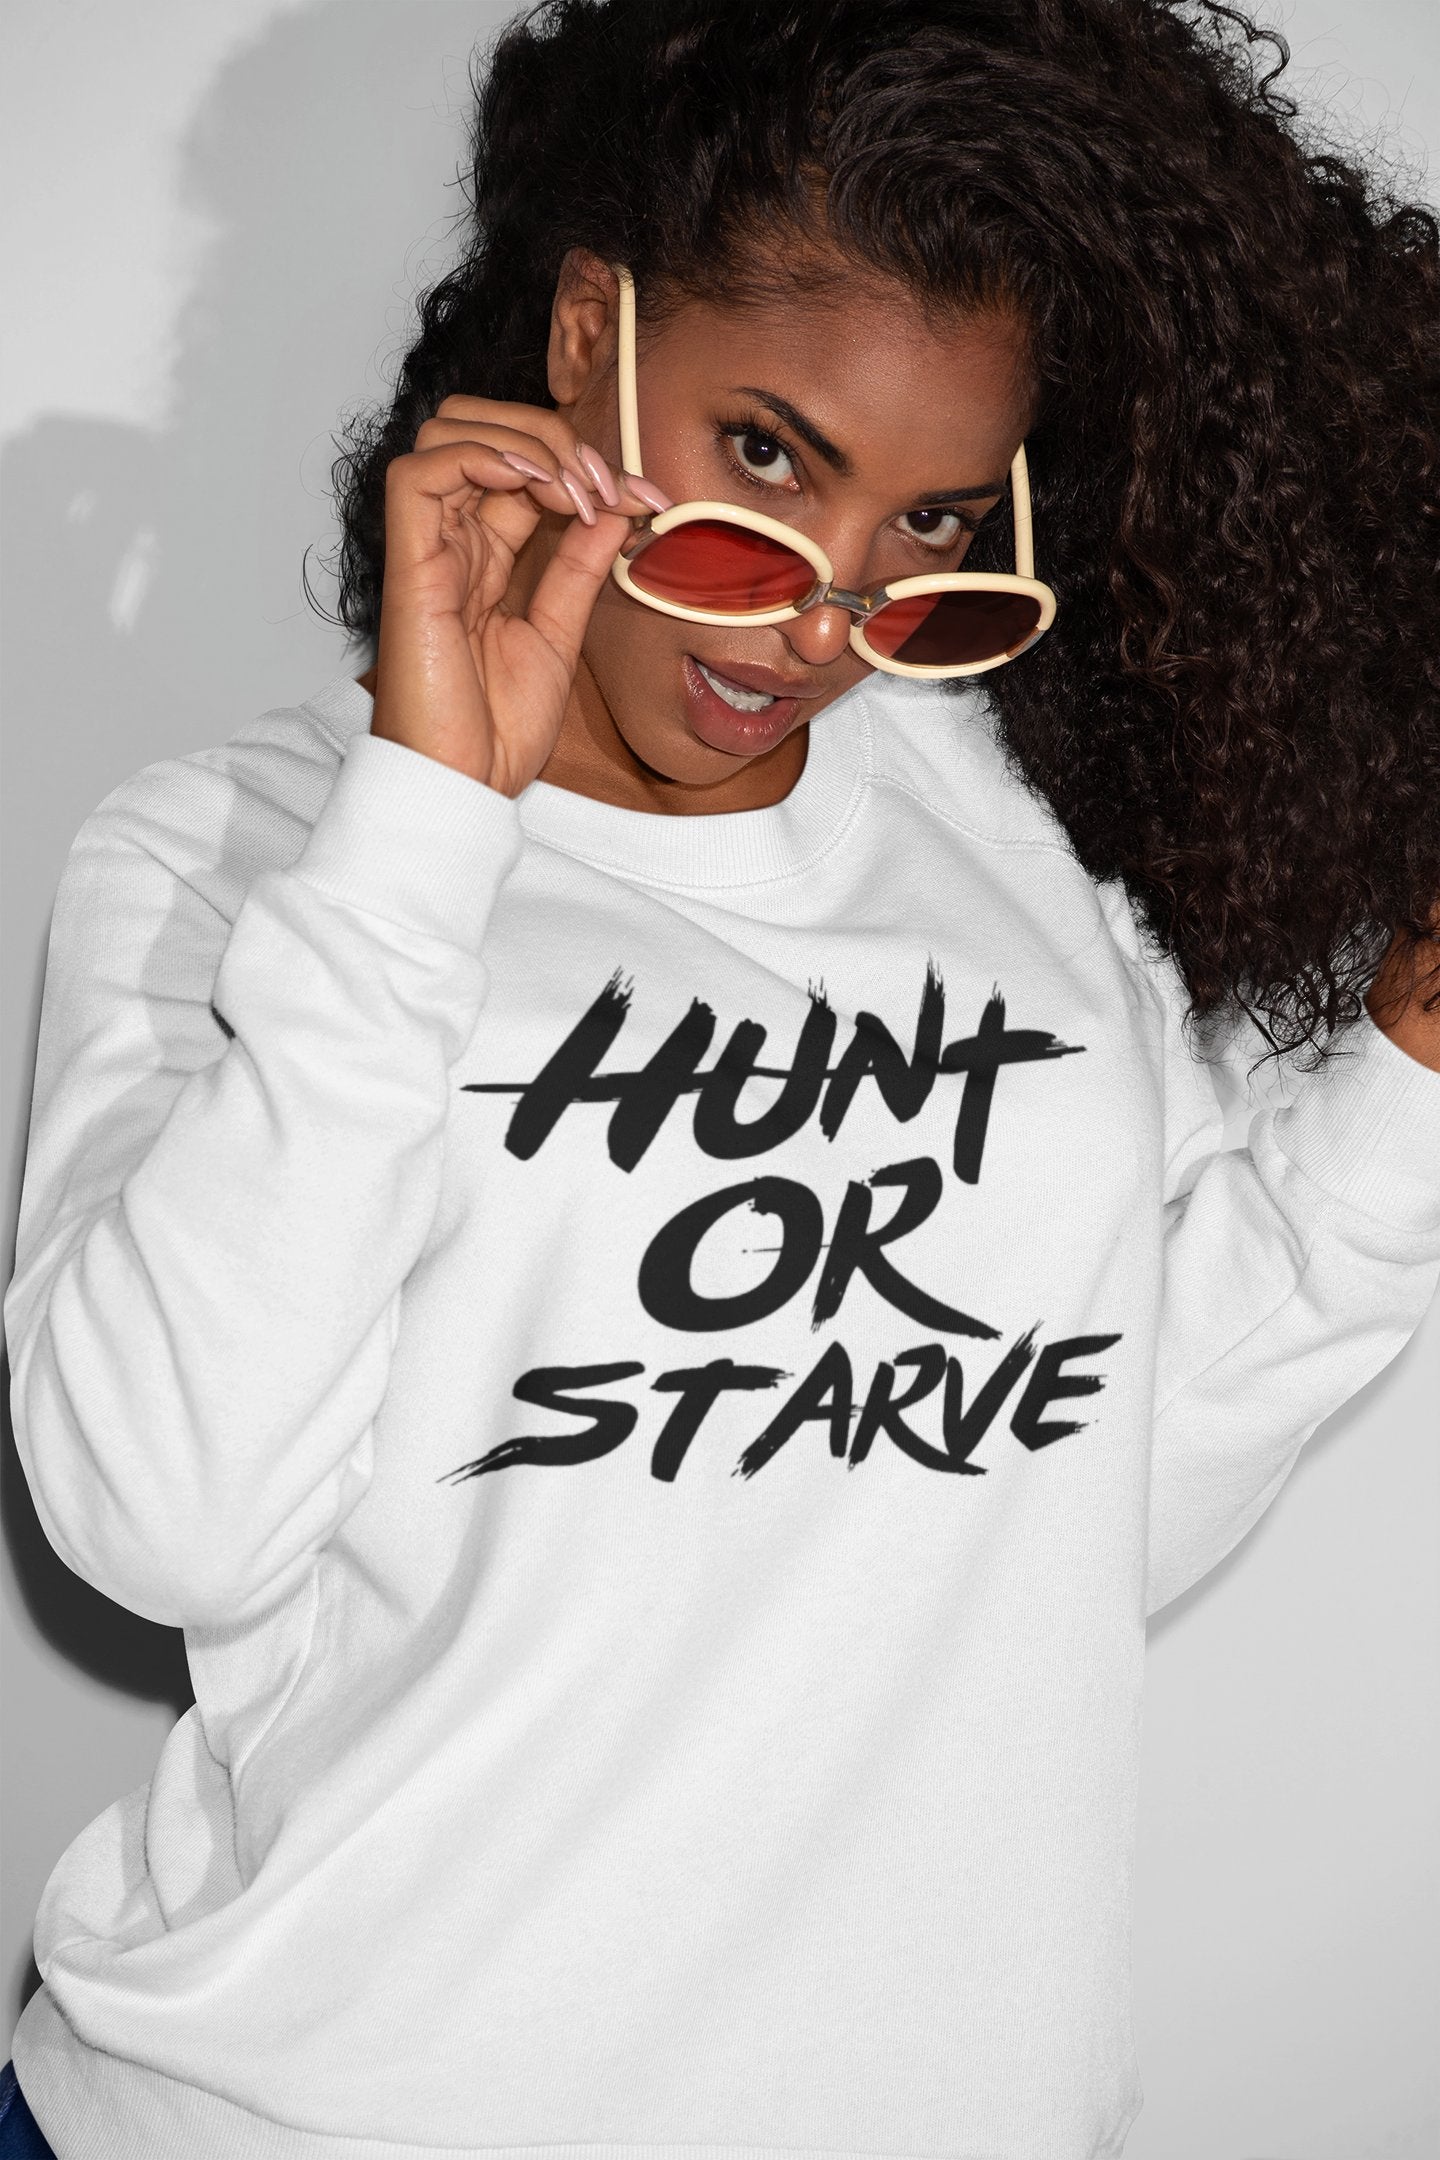 A woman wears a 'Hunt or Starve' slogan sweatshirt, exuding confidence and determination.